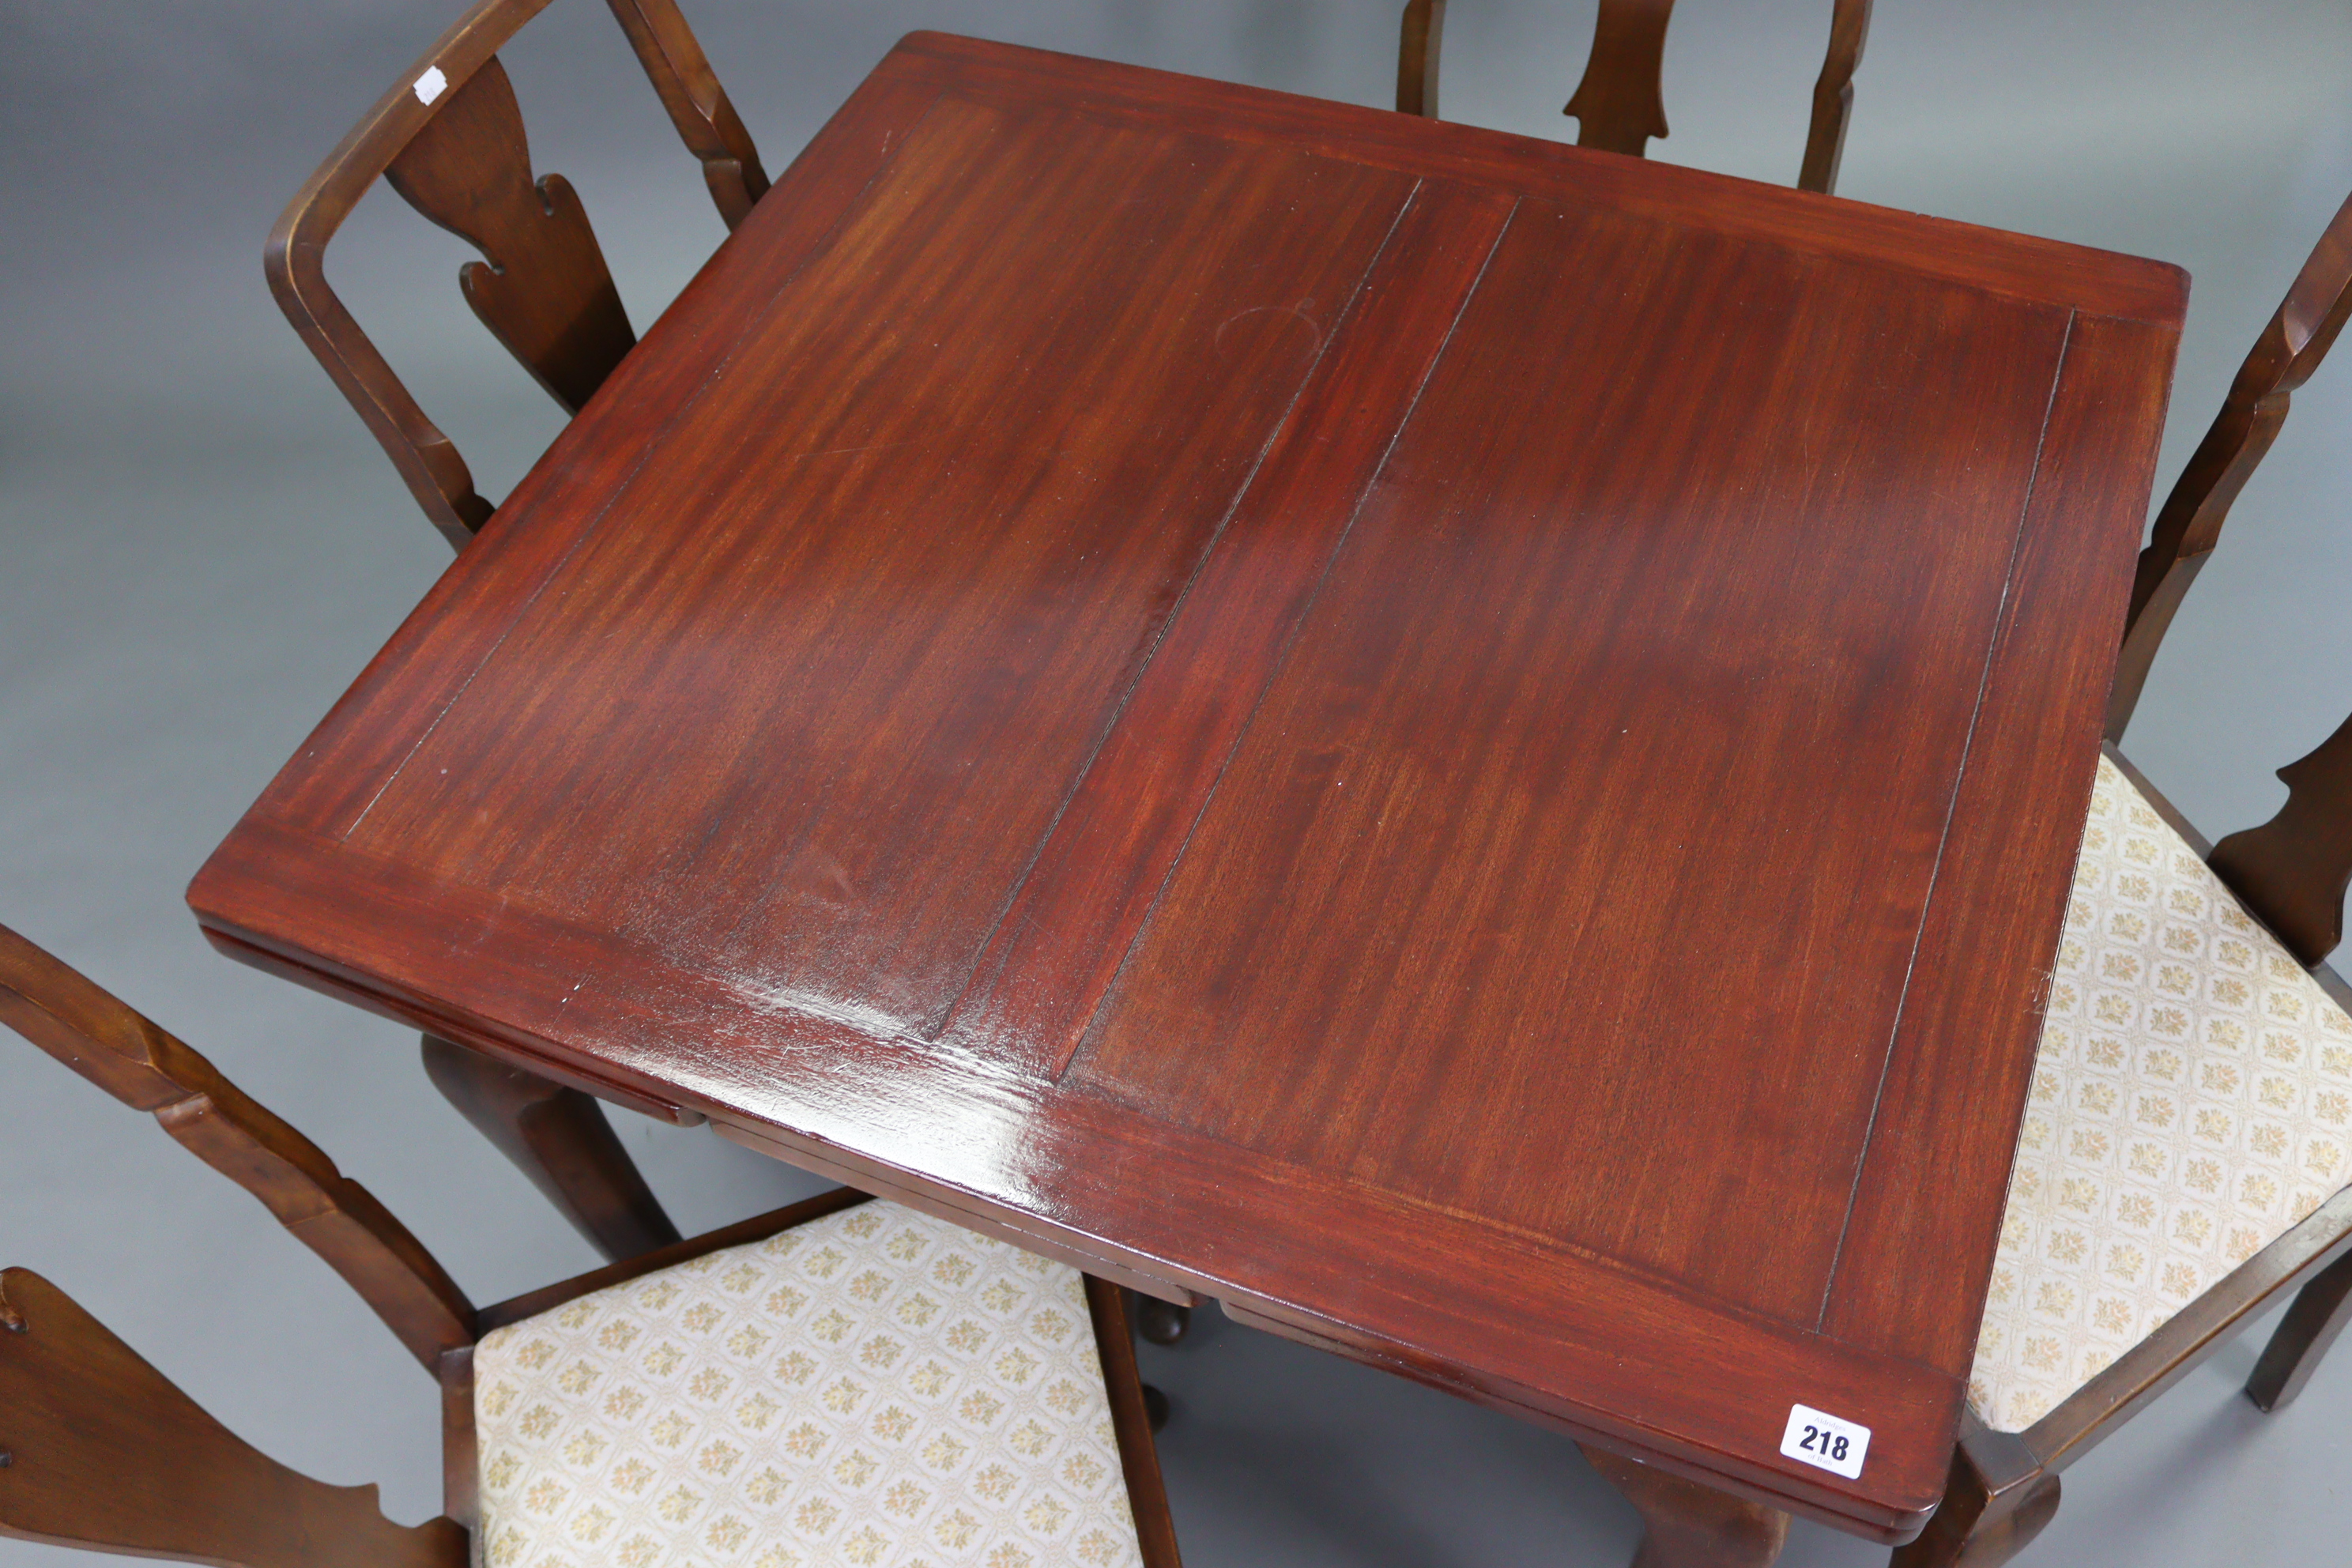 A mahogany draw-leaf dining table on four slender cabriole legs & pad feet, 32” x 57” (open), & a - Image 3 of 6